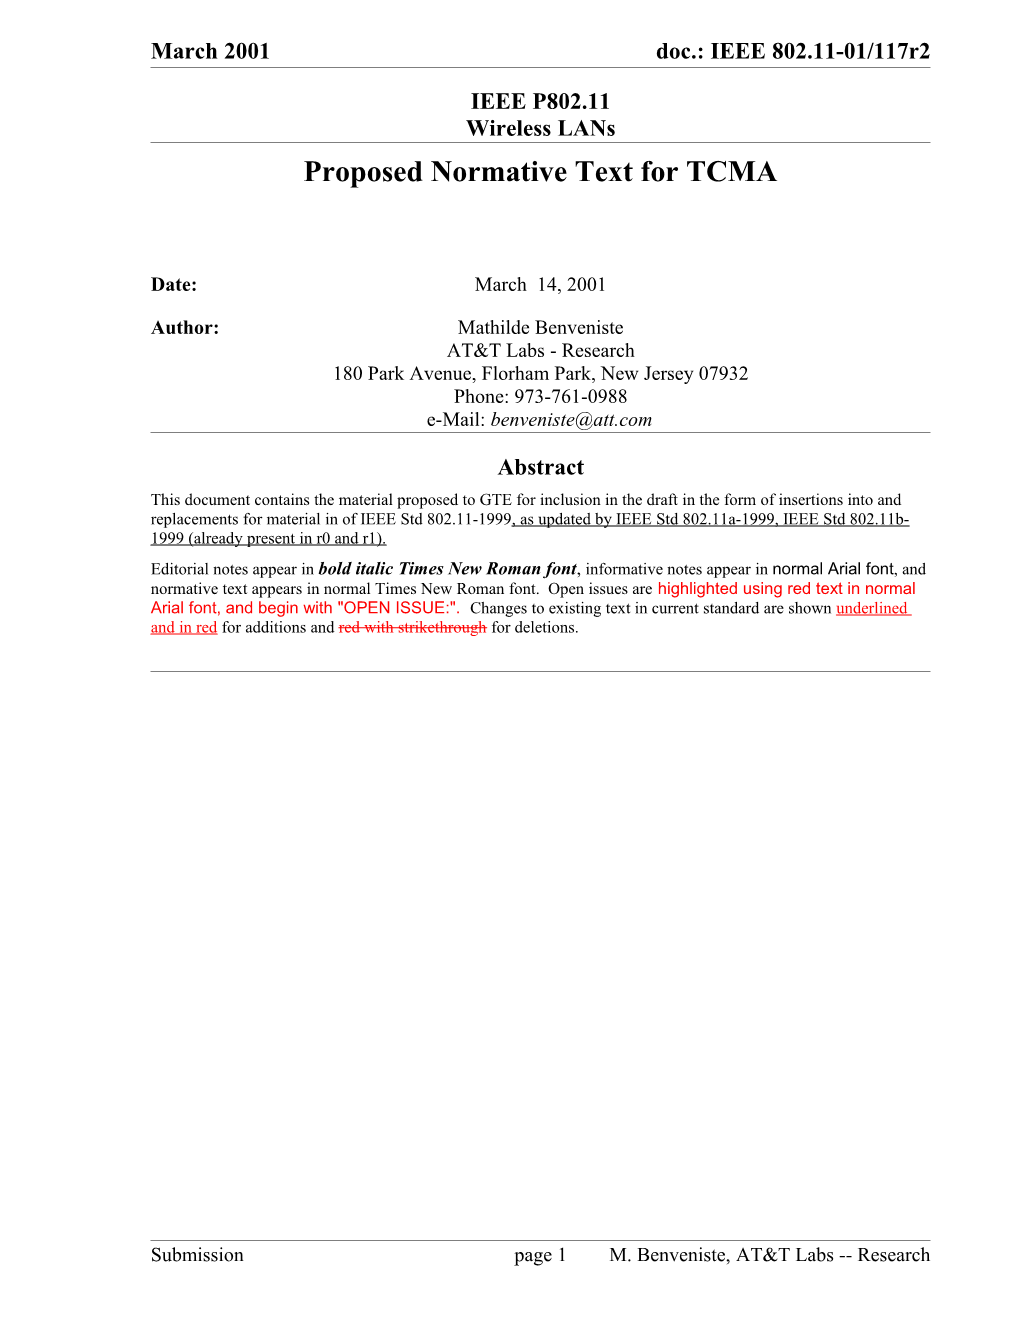 Proposed Normative Text for TCMA